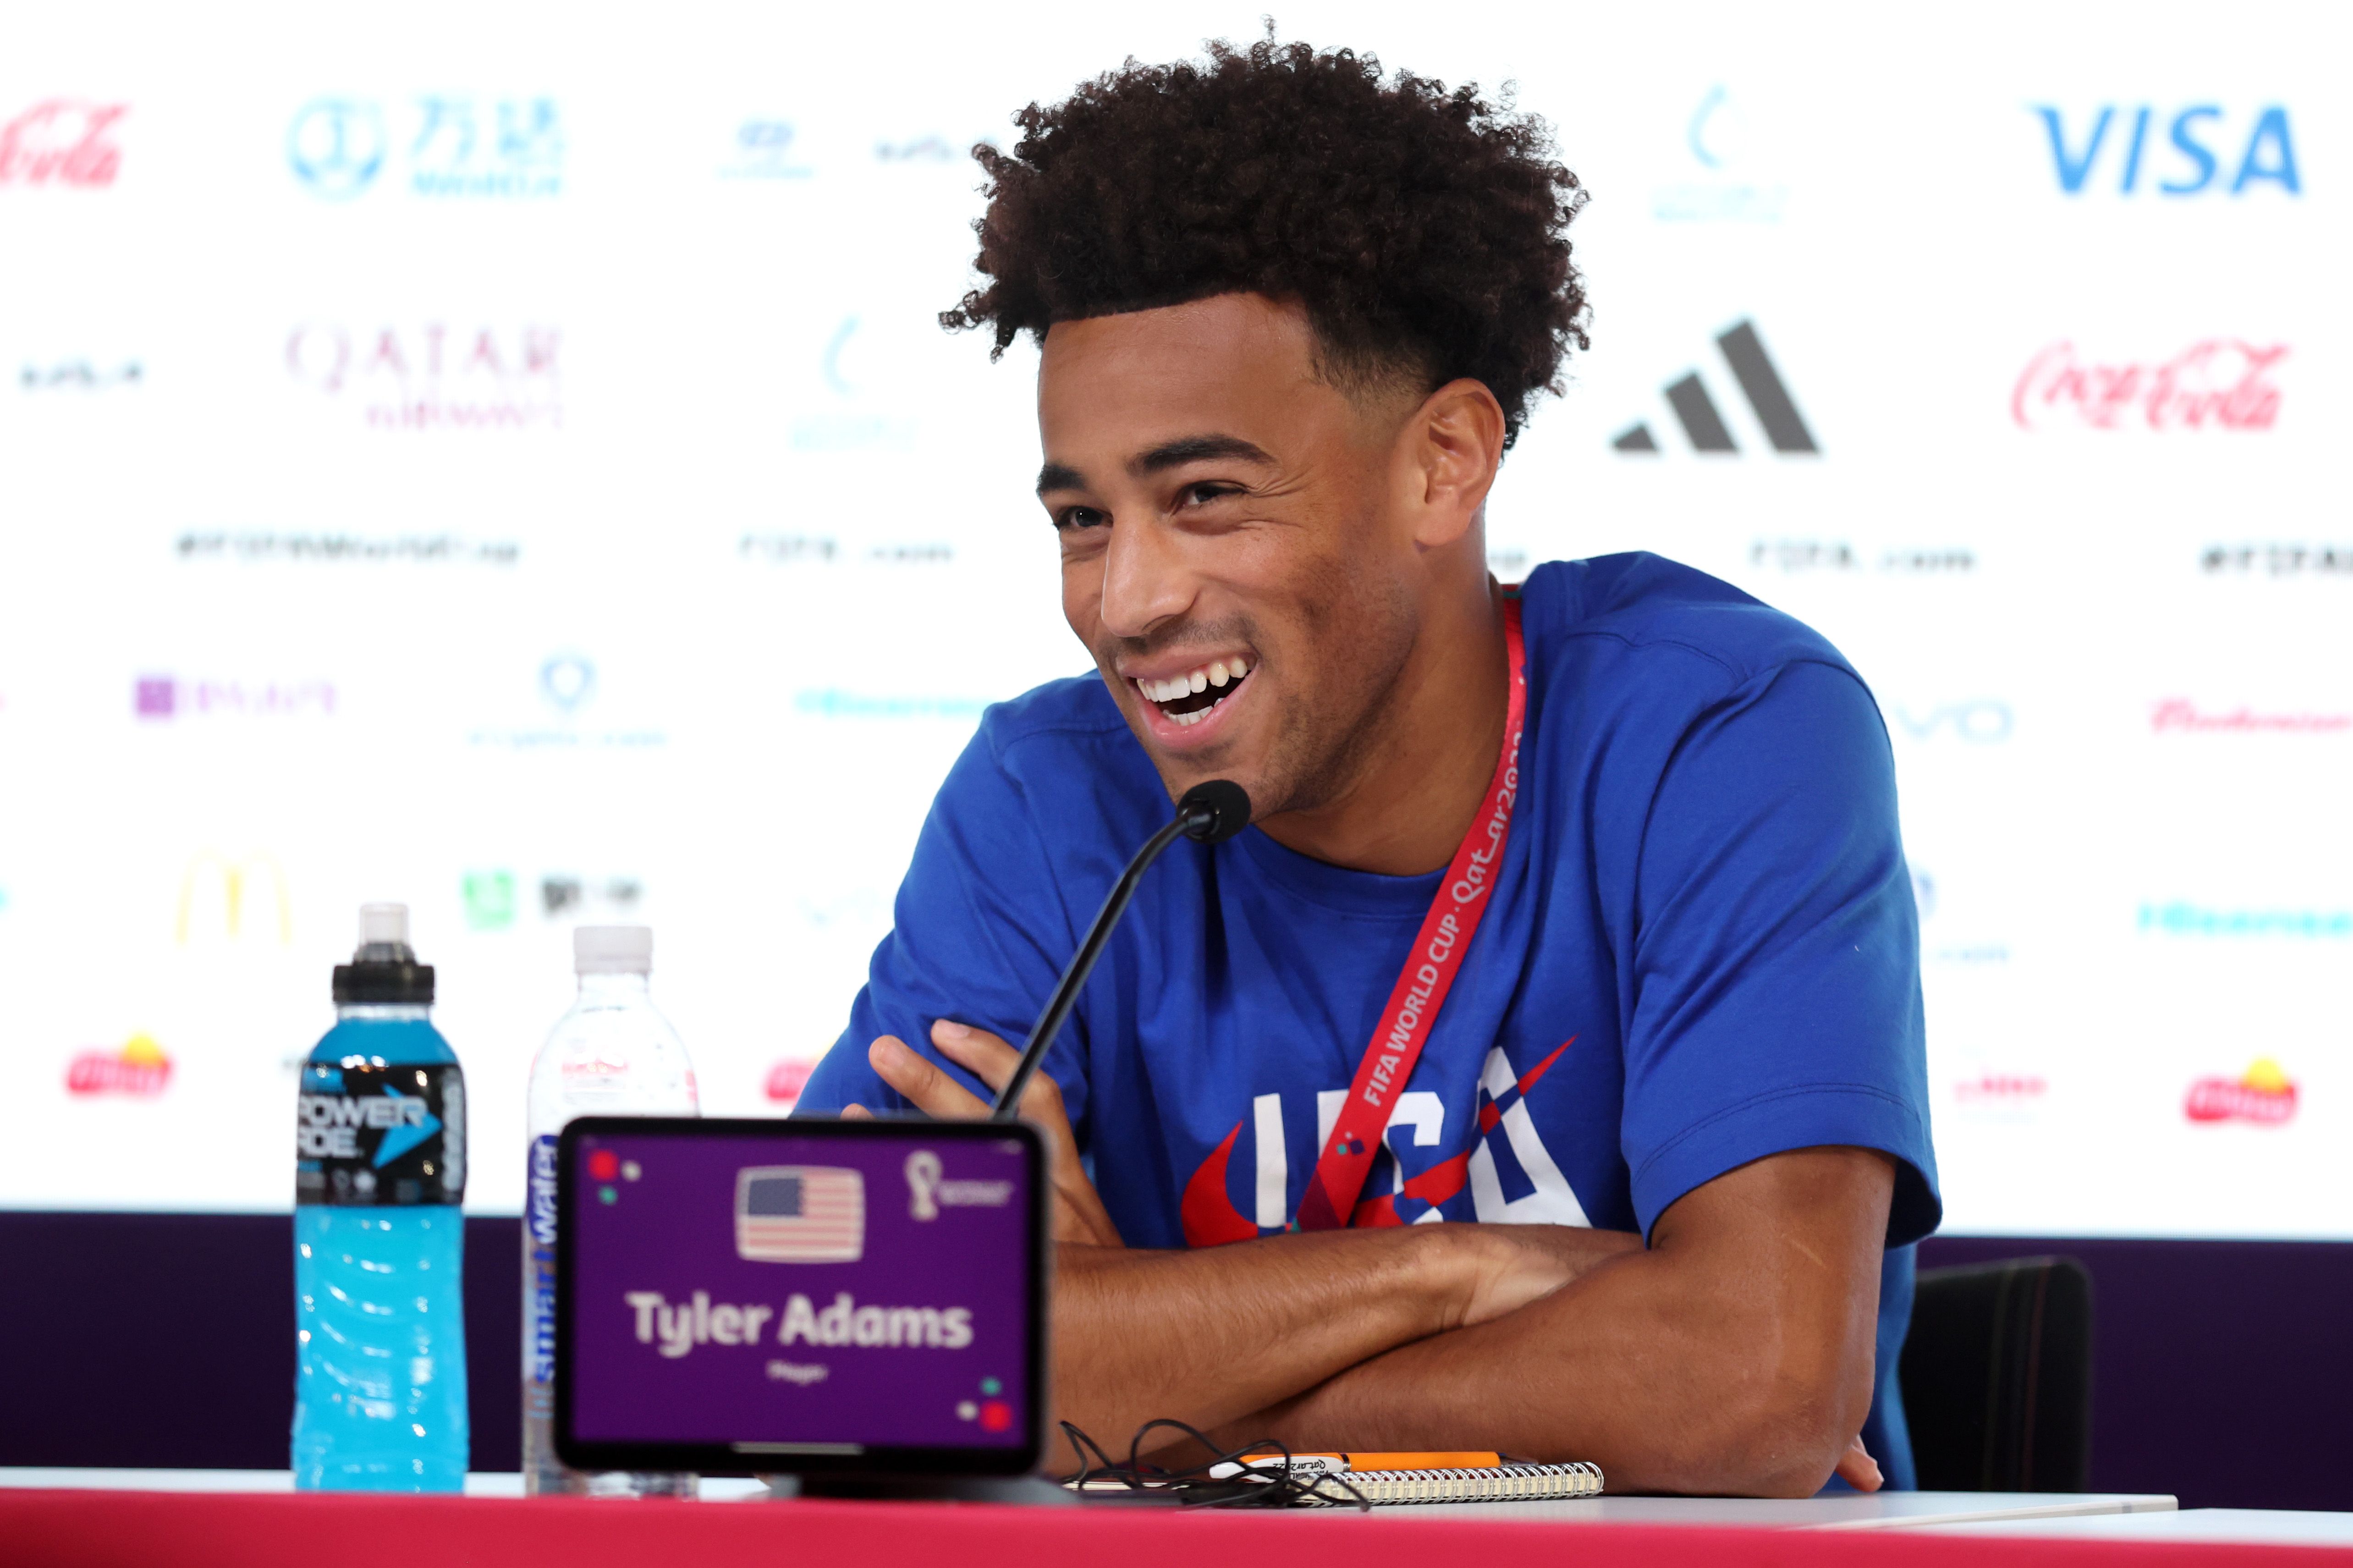 Tyler Adams in USA World Cup press conference